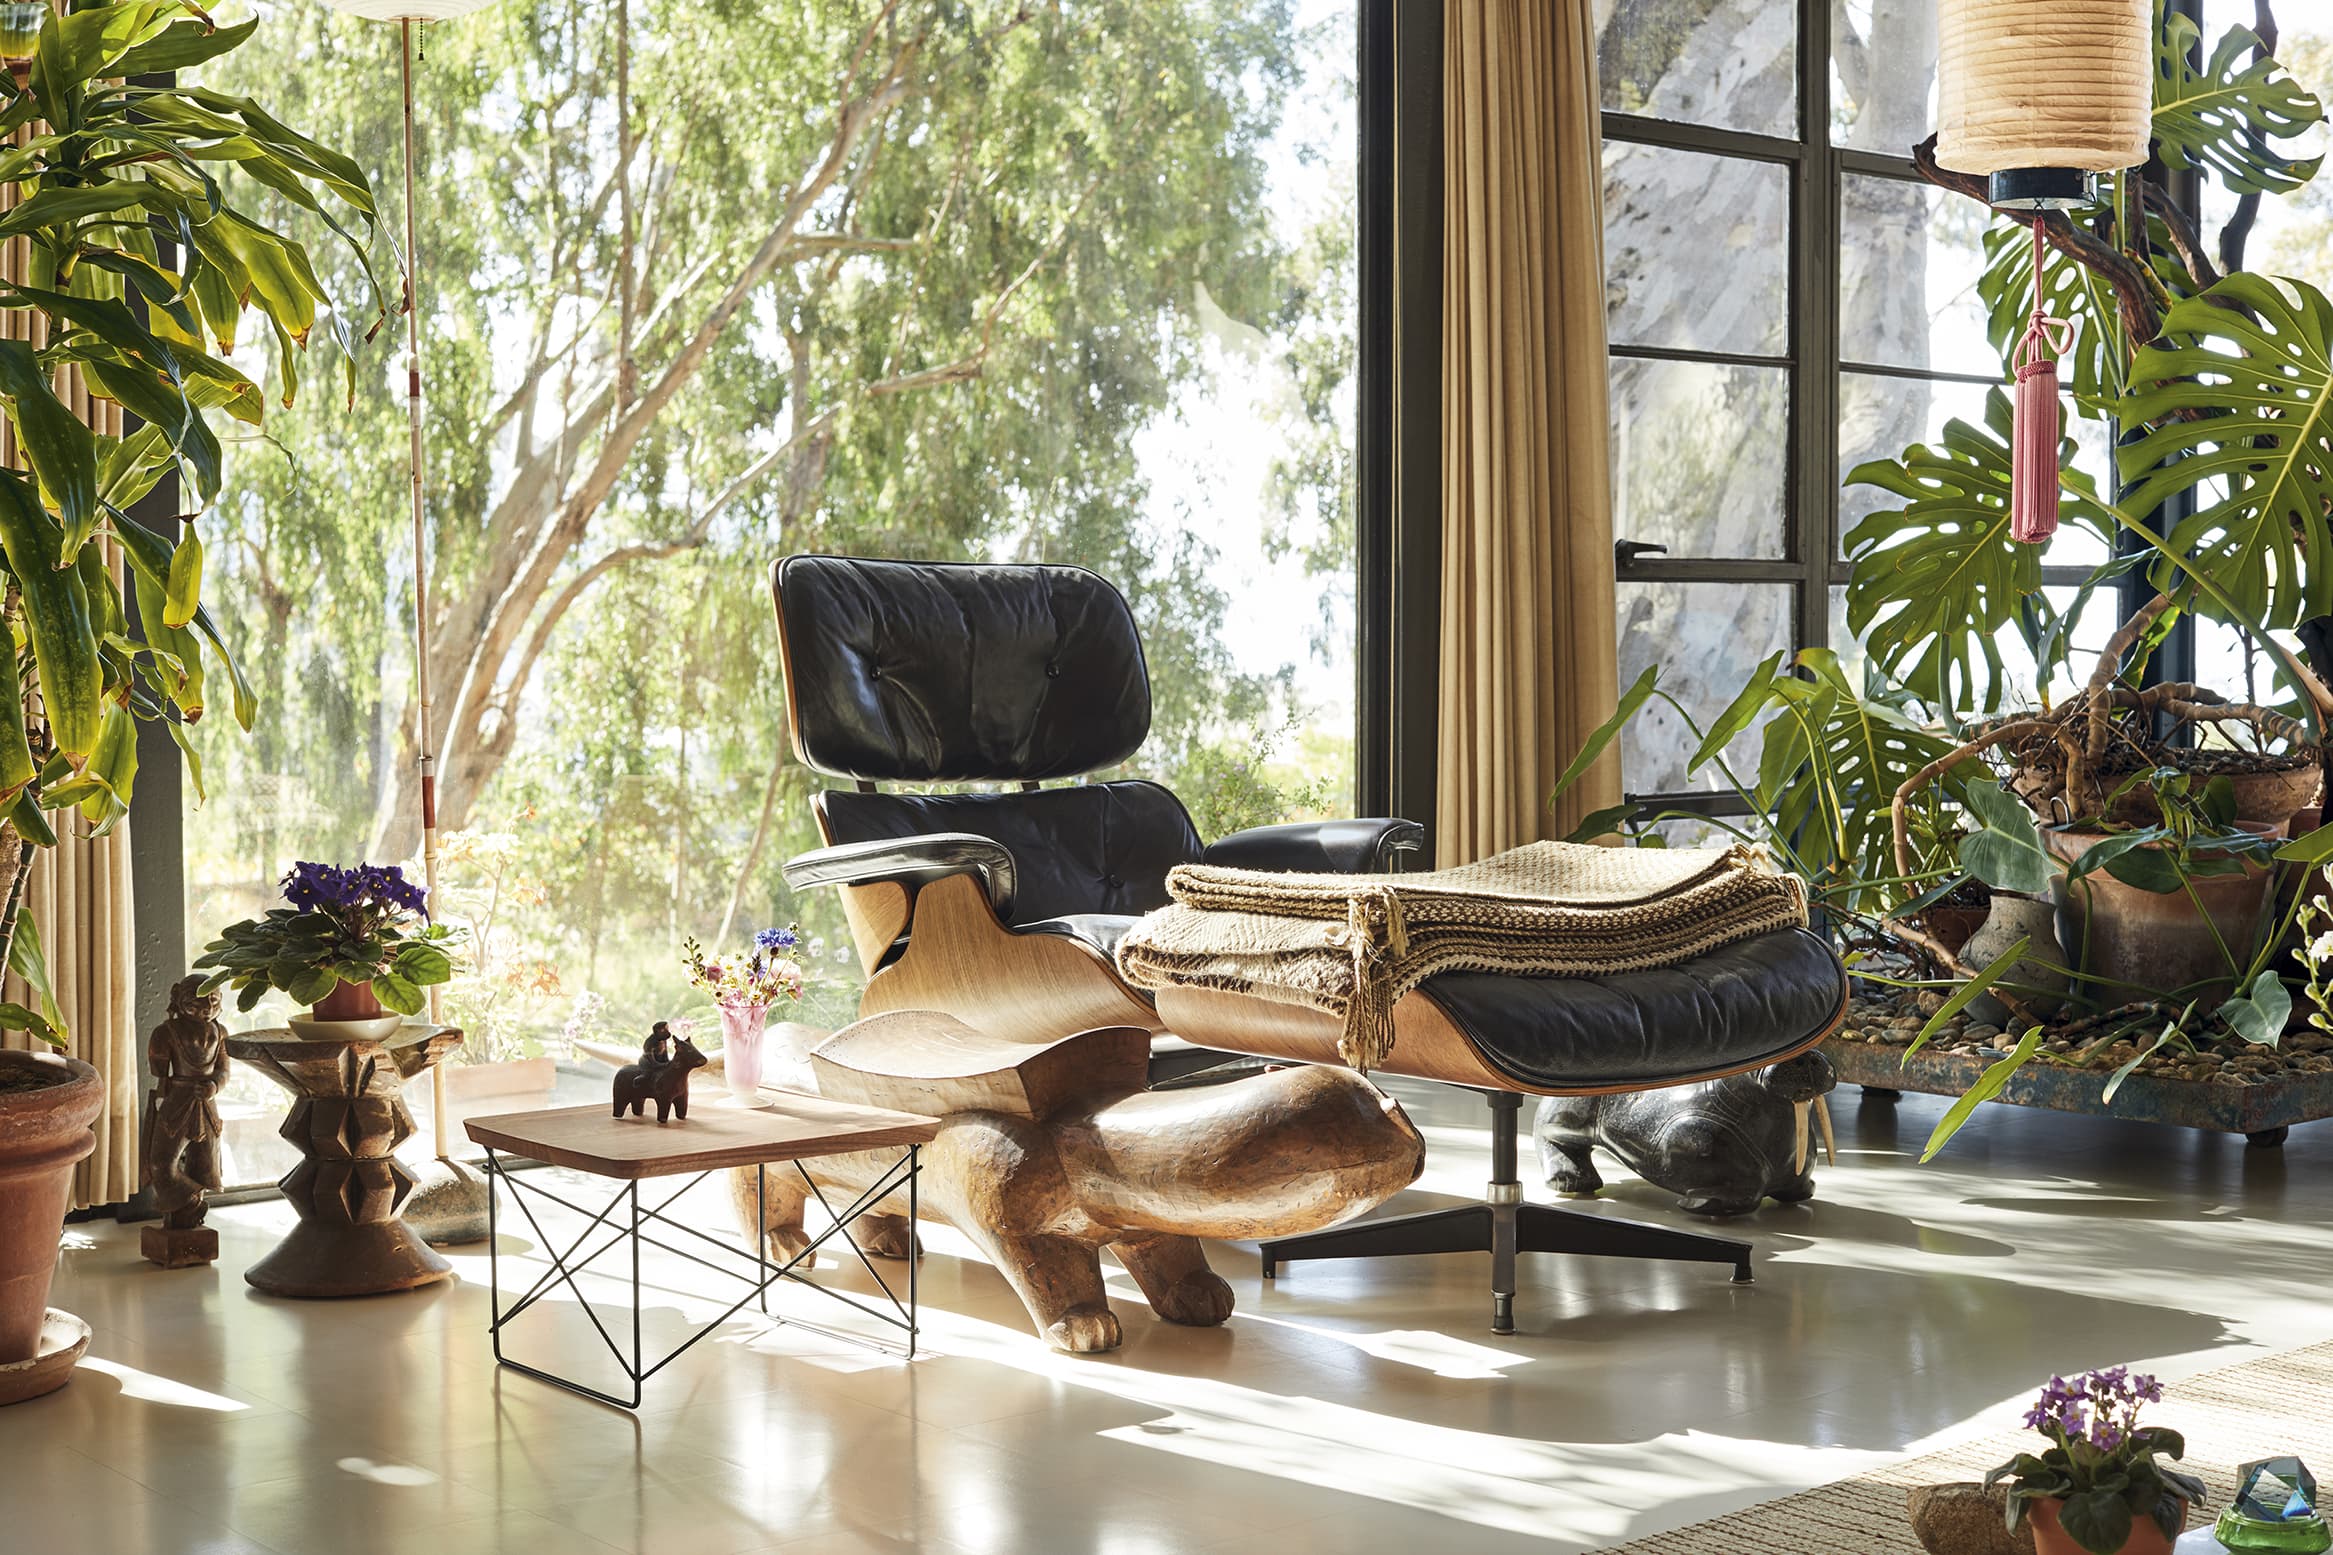 Eames Tables Made from Trees Harvested at the Eames House